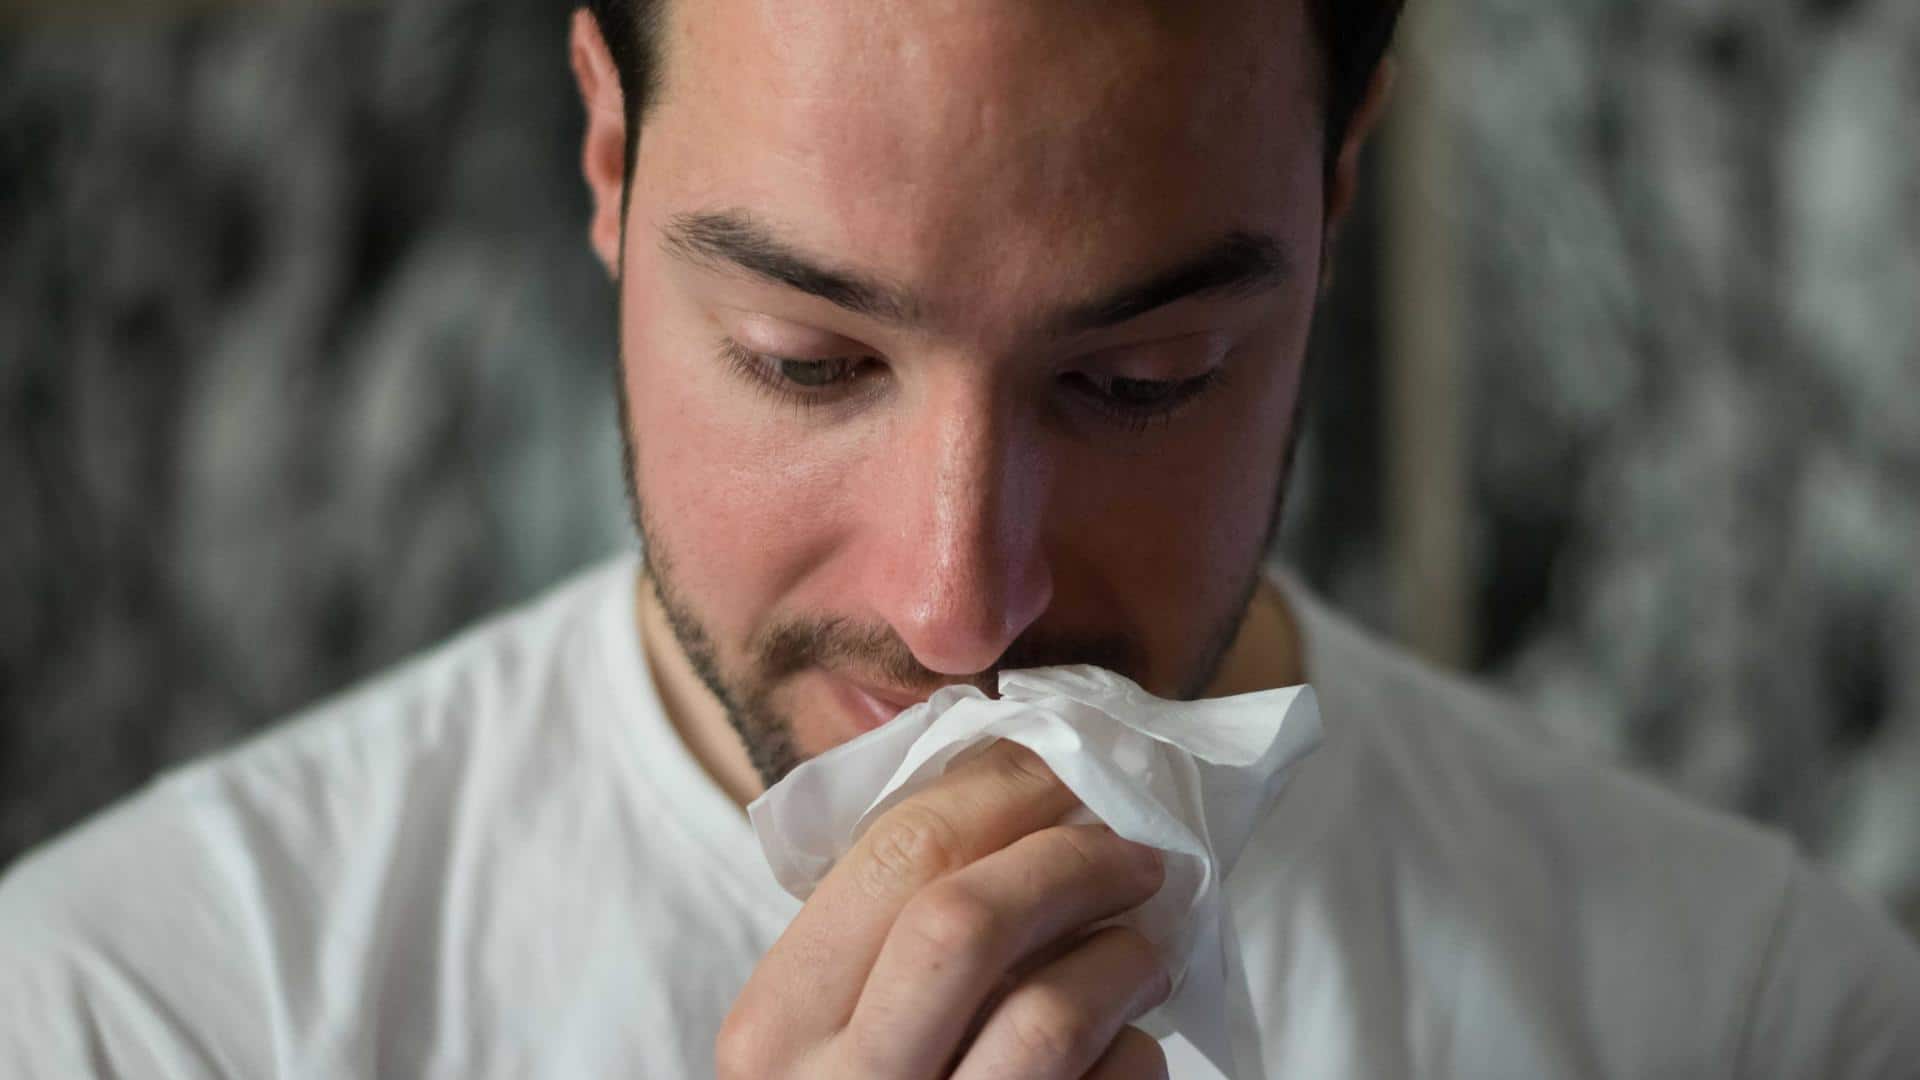 Suffering from a runny nose? Try these natural home remedies